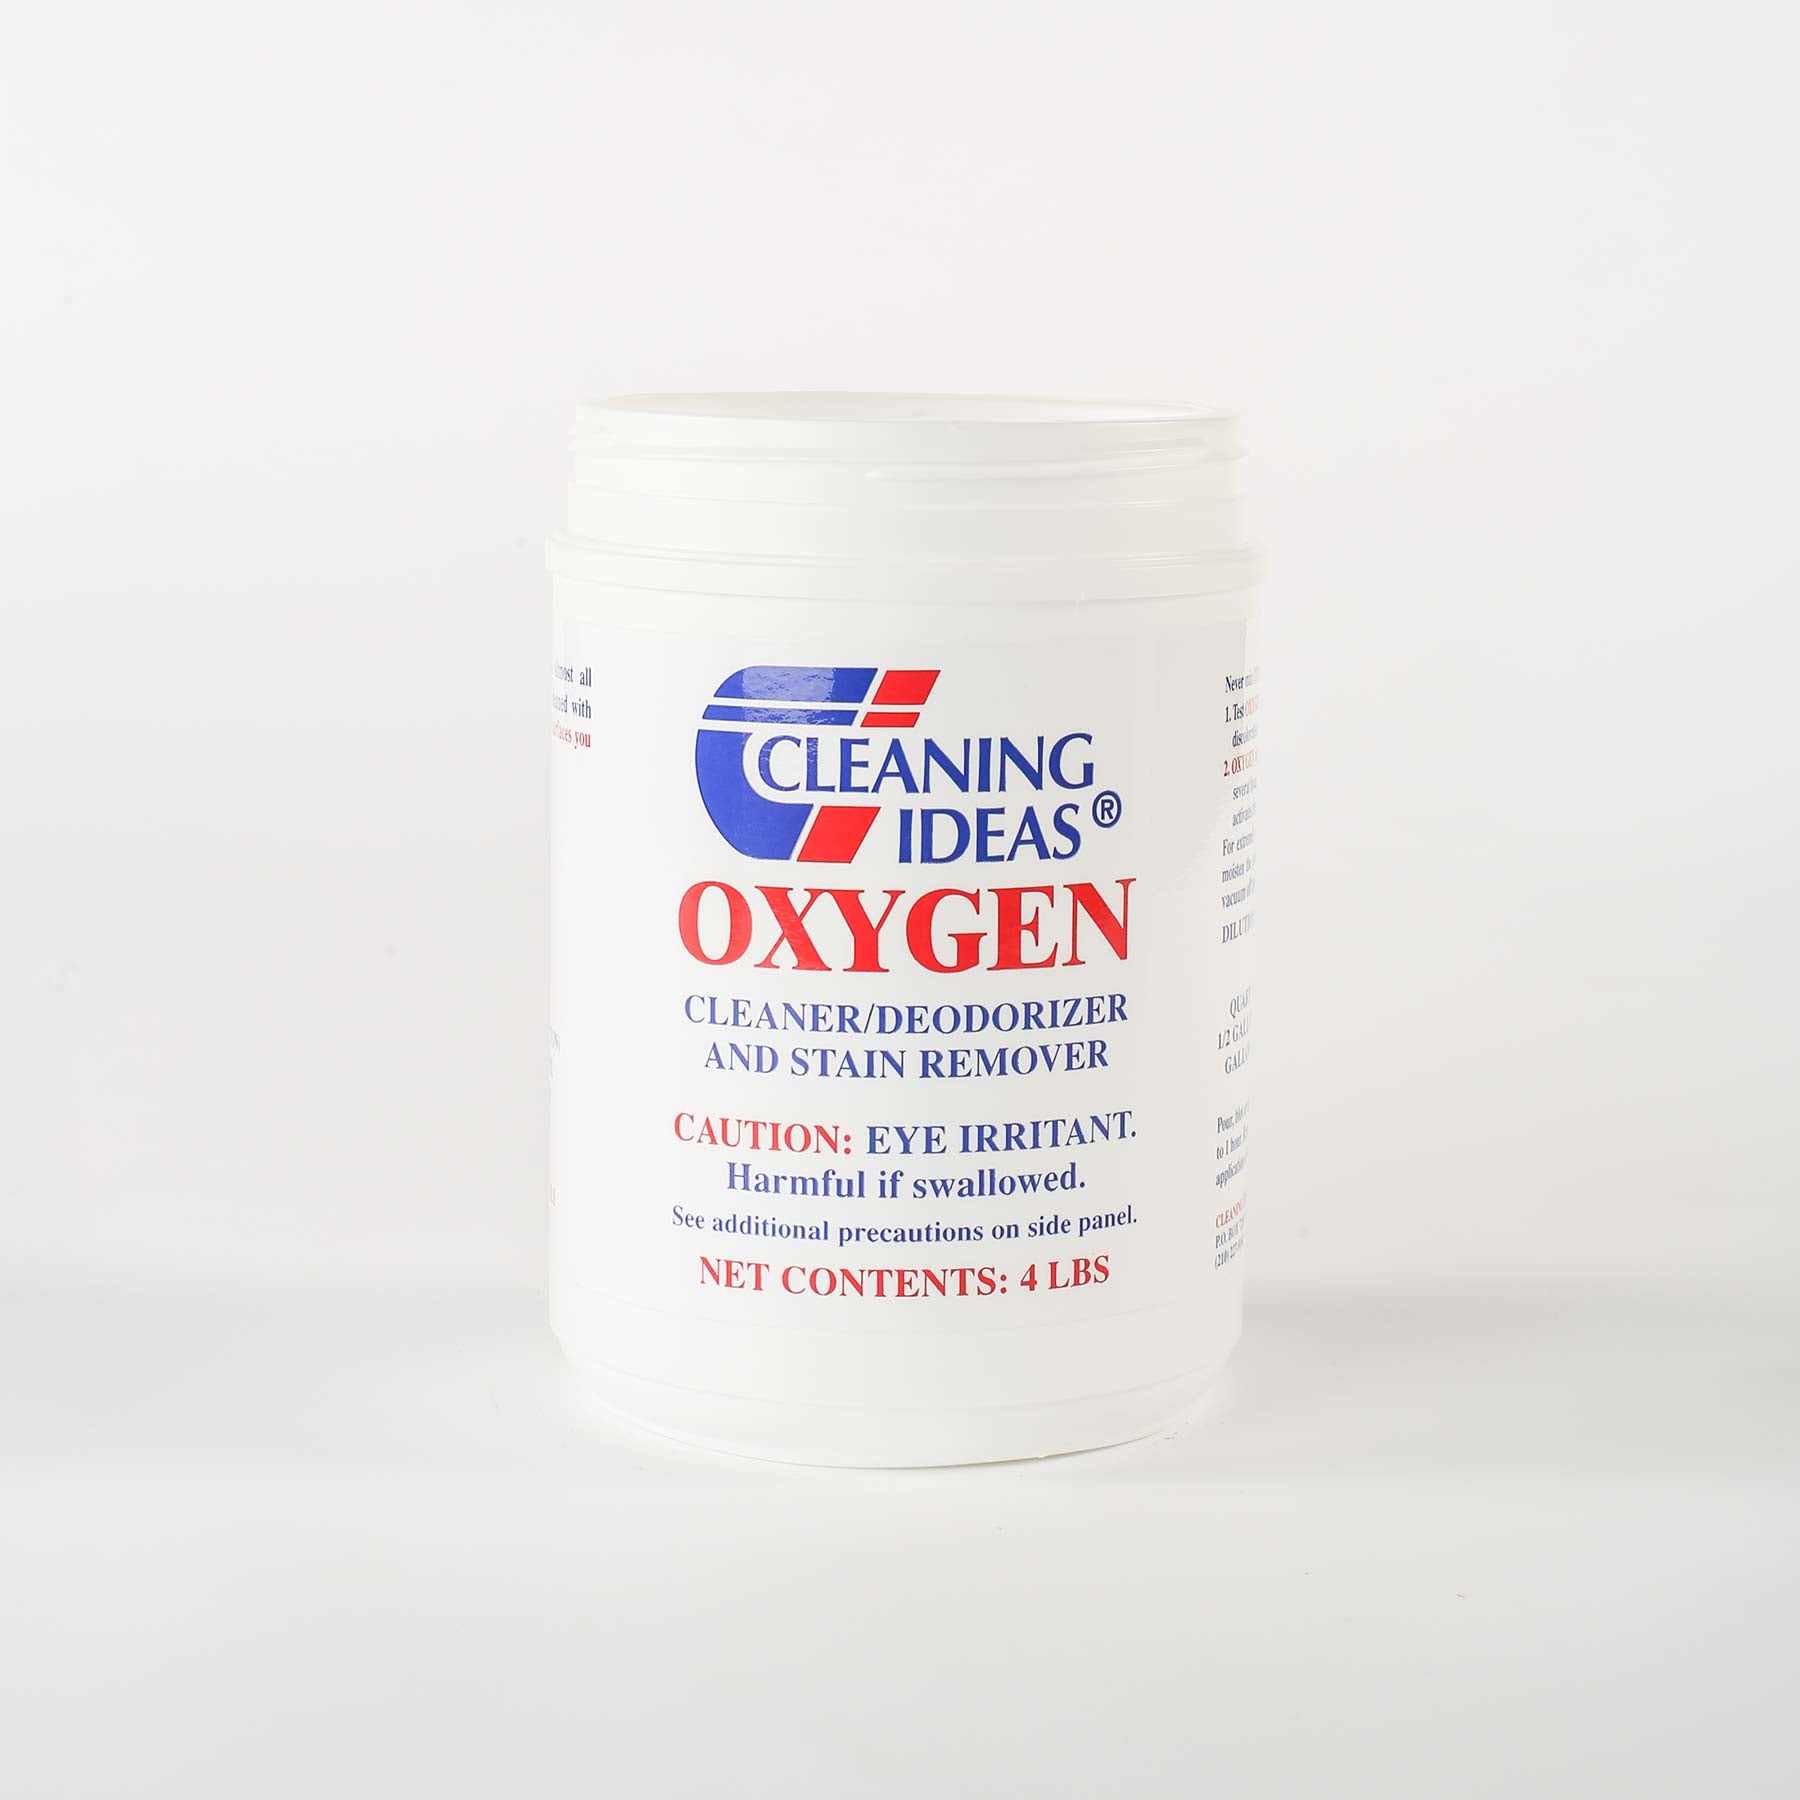 Oxygen Cleaner / Deodorizer and Stain Remover - Cleaning Ideas 